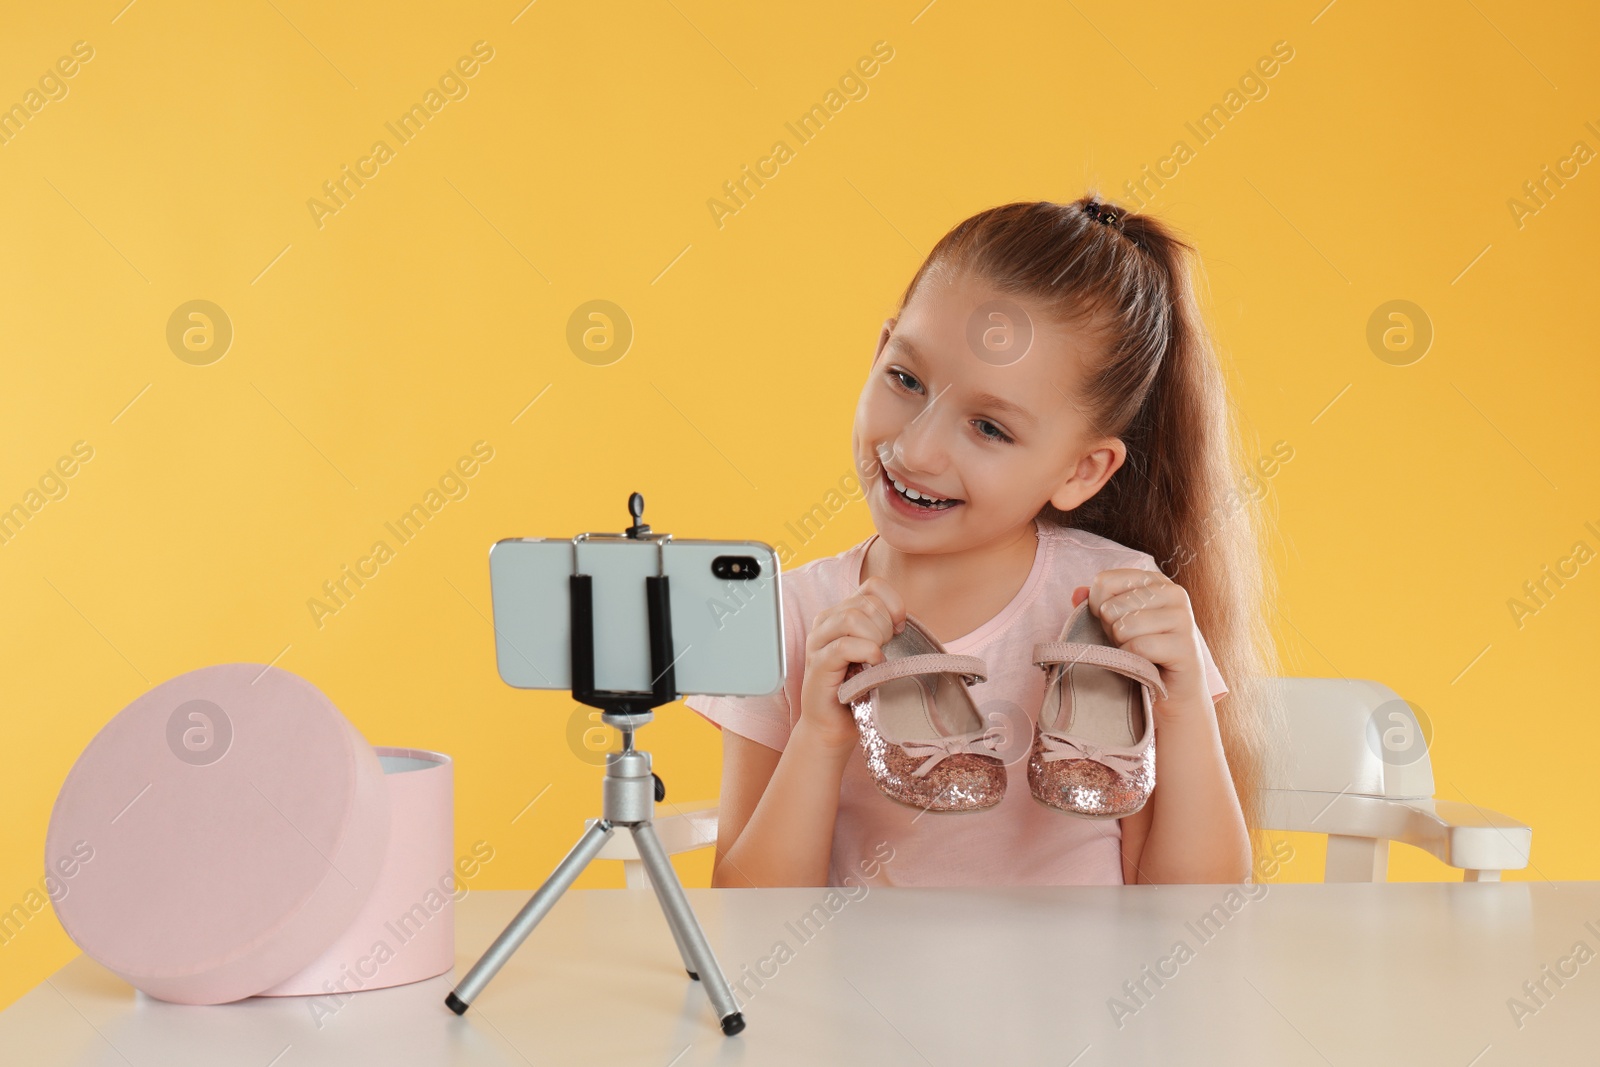 Photo of Cute little blogger with shoes recording video at table on yellow background